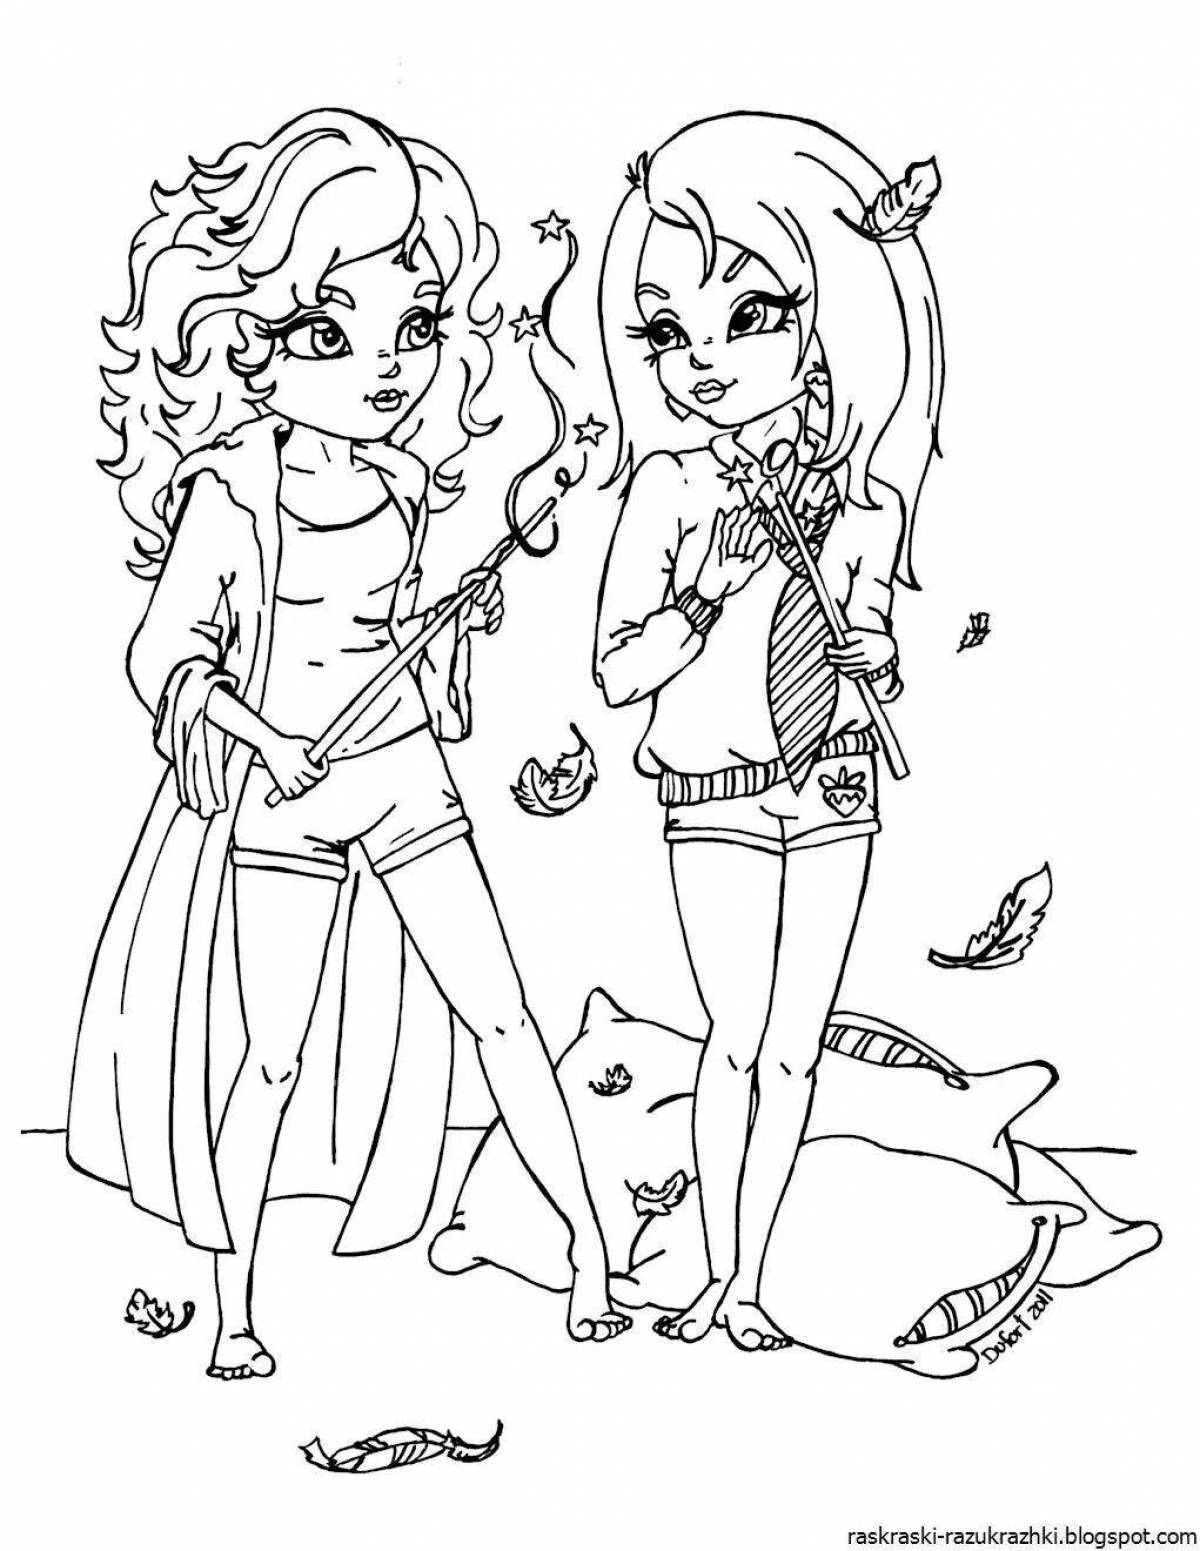 Two friends playful coloring book